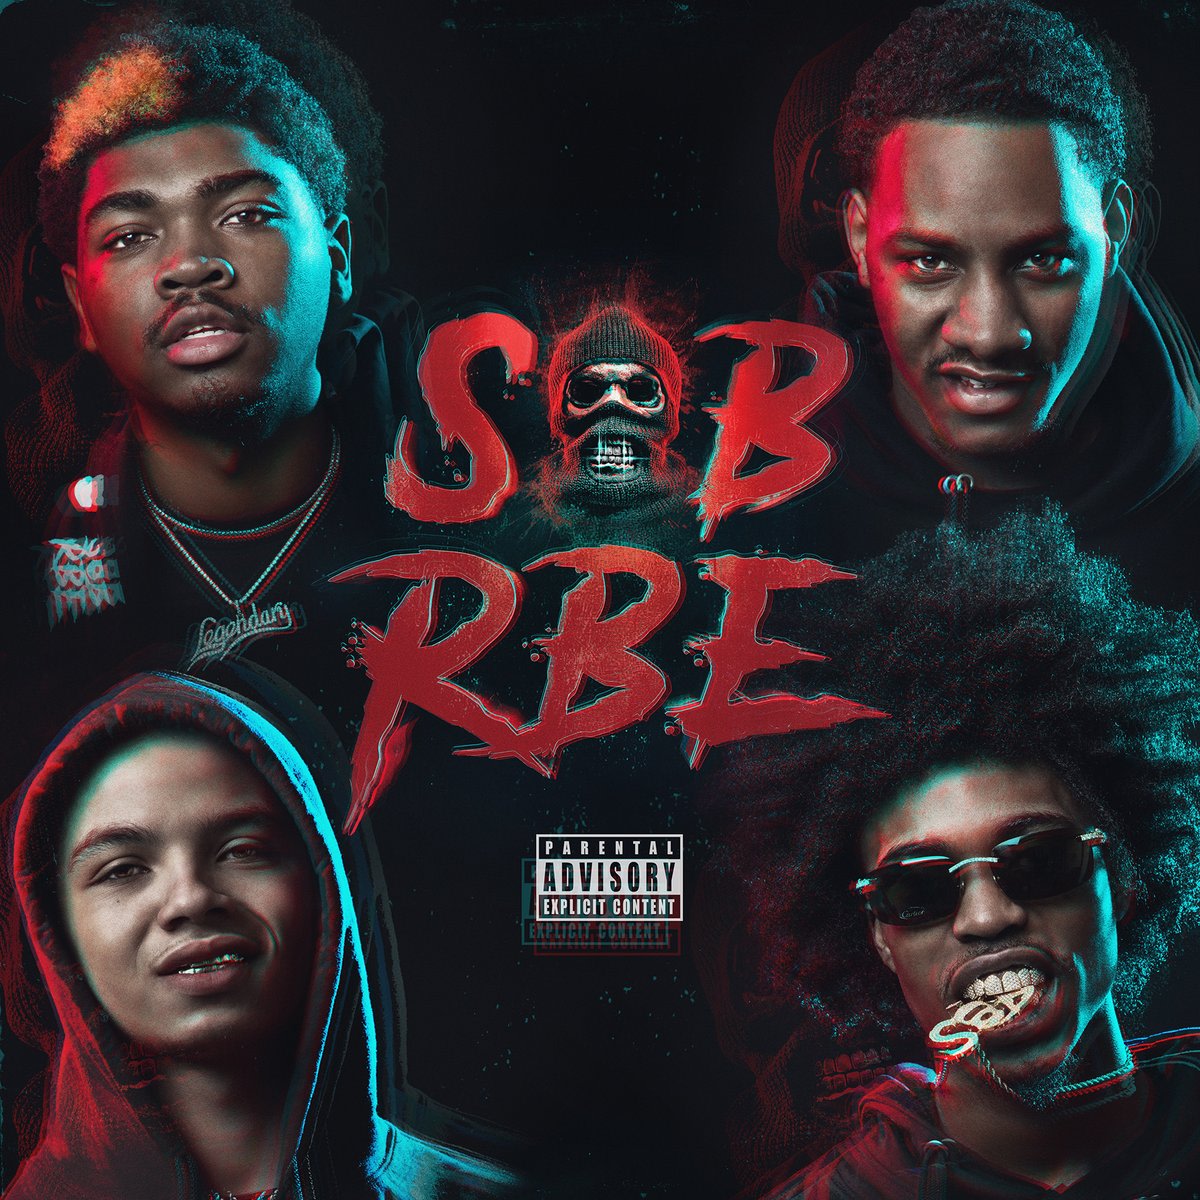 How SOB X RBE leveled up, from Black Panther to their debut album